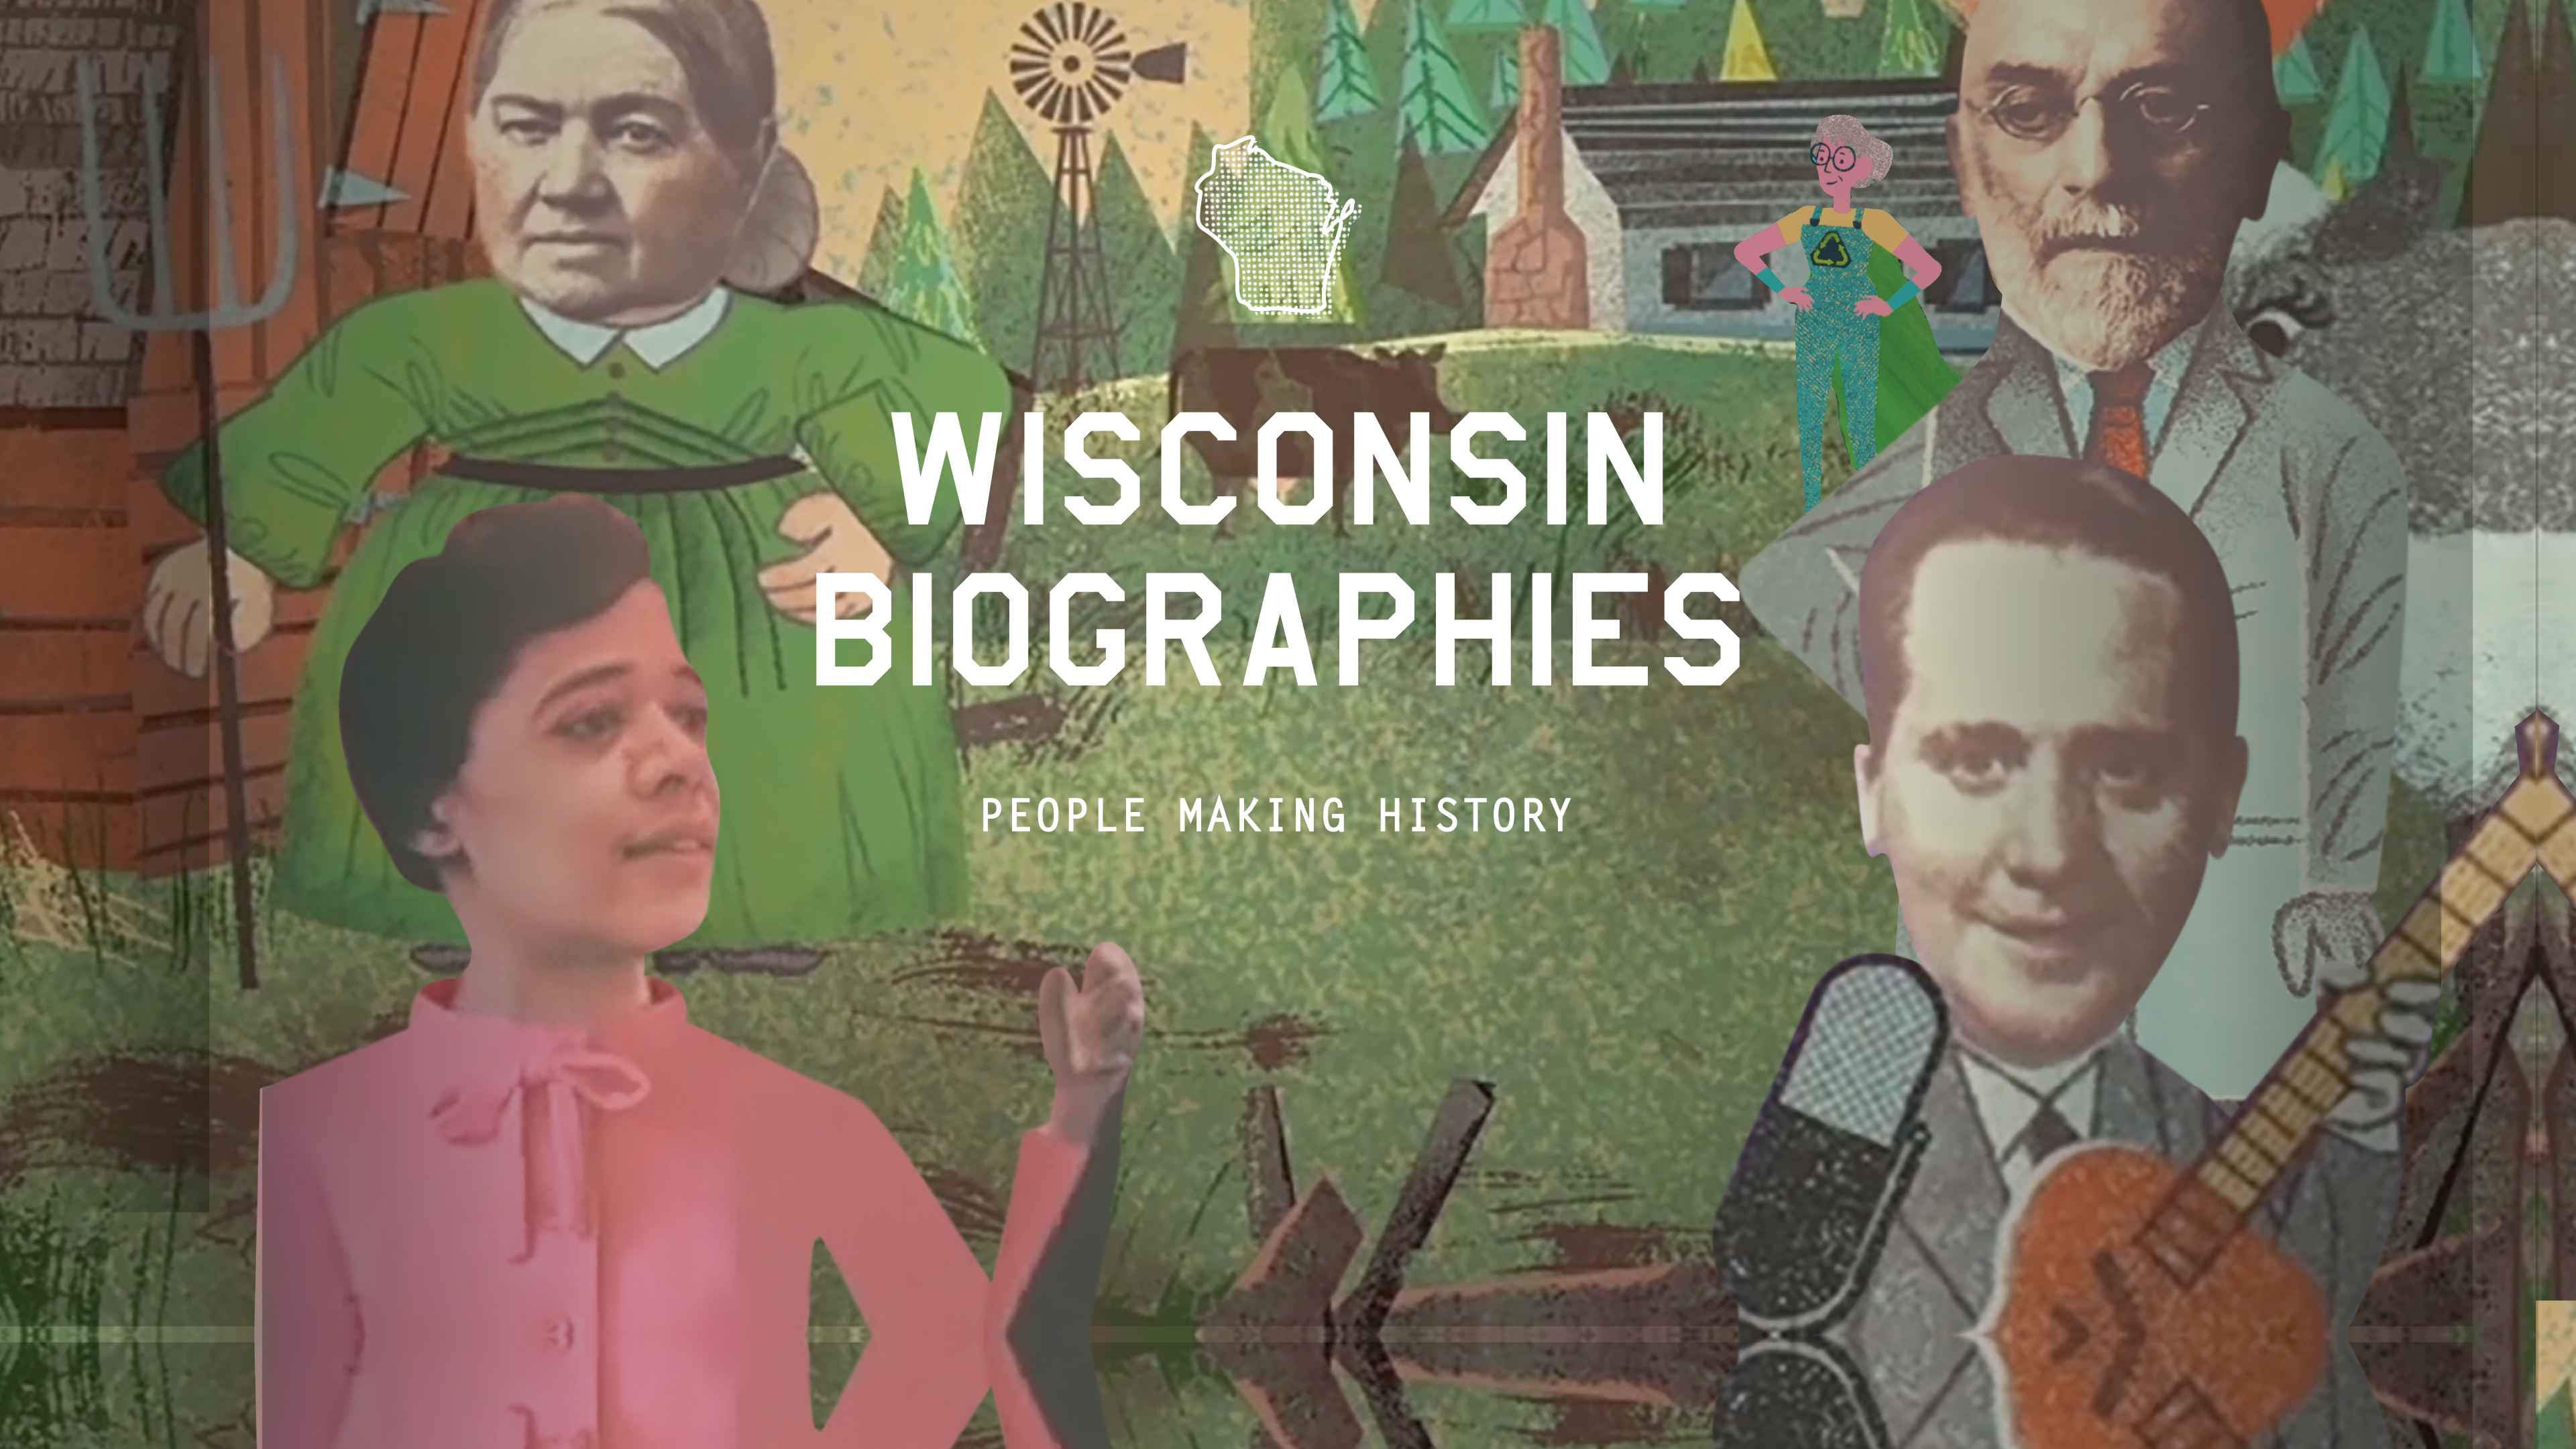 Wisconsin Biographies overview image